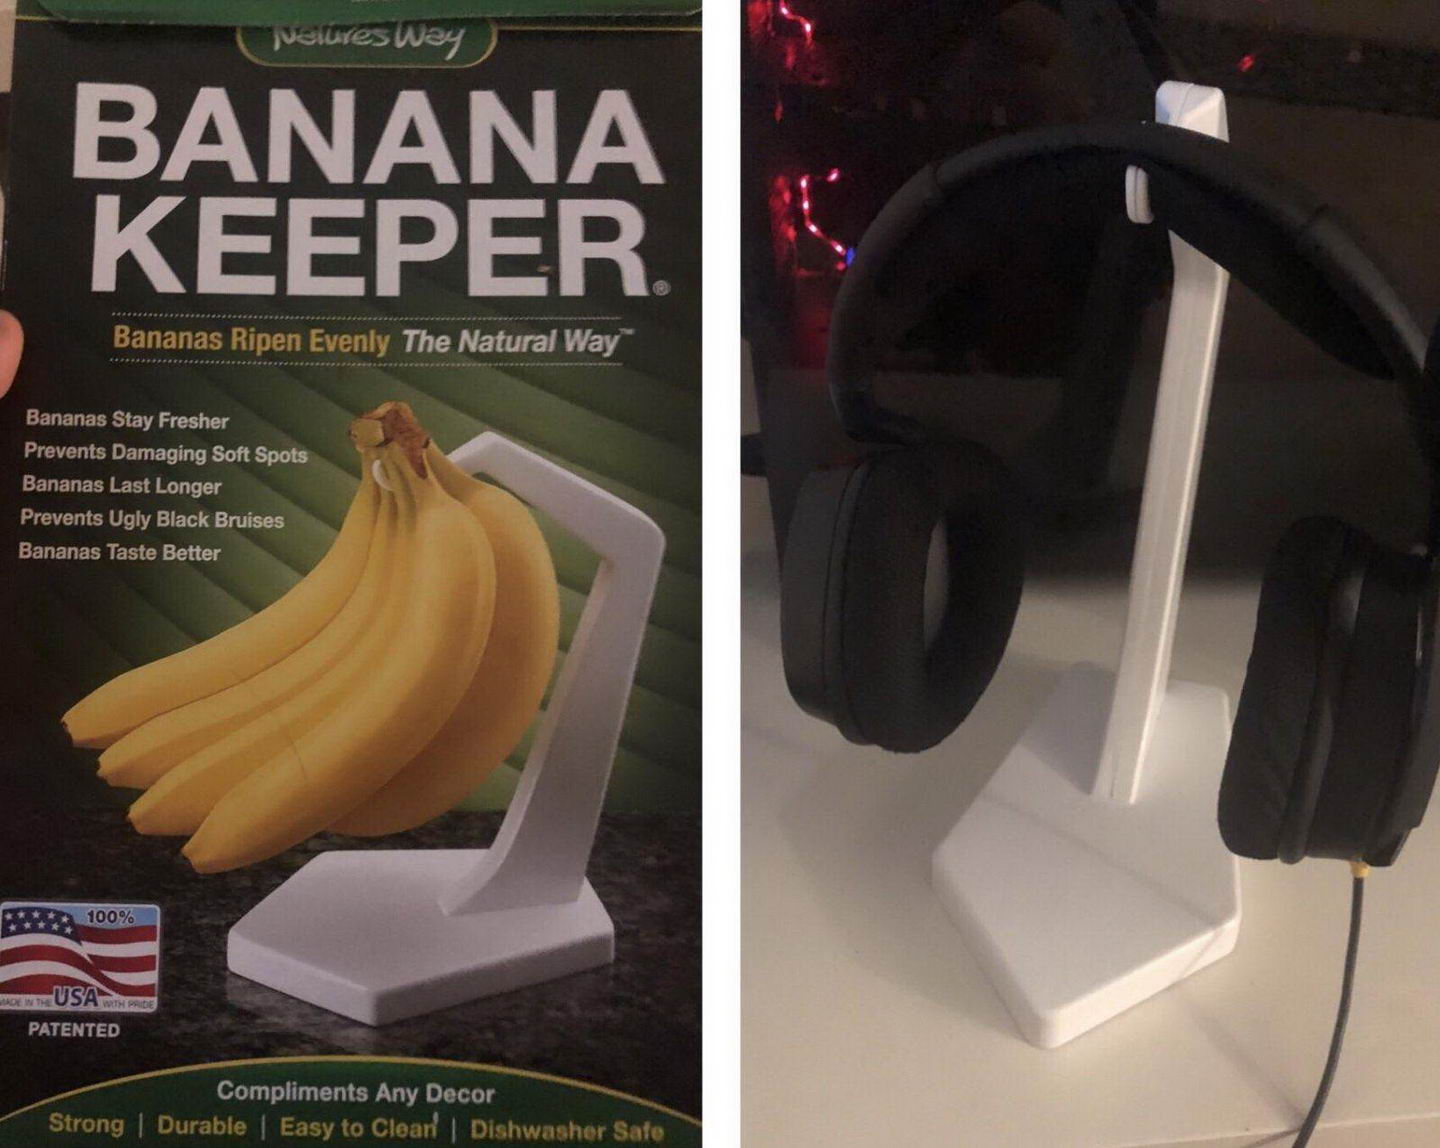 headphones - relives way Banana Keeper Bananas Ripen Evenly The Natural Way Bananas Stay Fresher Prevents Damaging Soft Spots Bananas Last Longer Prevents Ugly Black Bruises Bananas Taste Better 100% Noen Usa Patented Compliments Any Decor Strong | Durabl